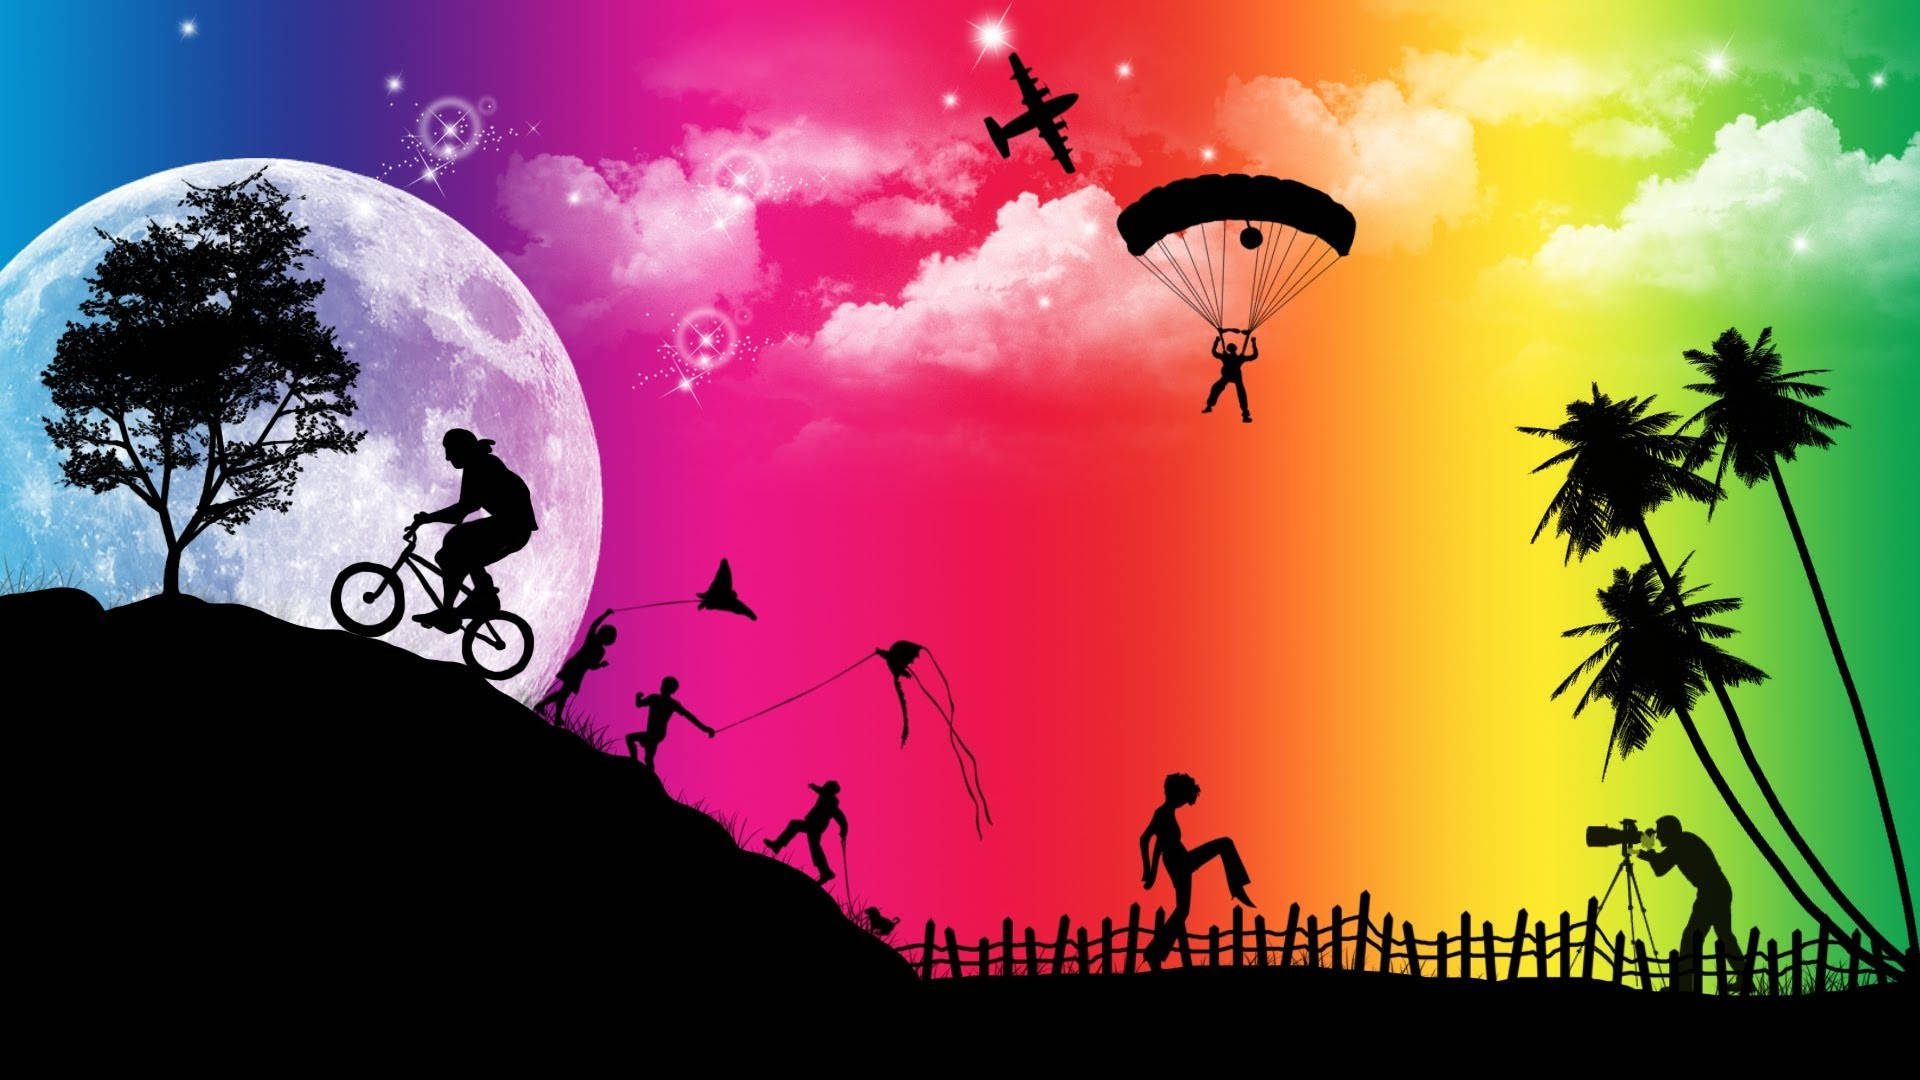 Photoshop Hd Silhouettes On Rainbow Background